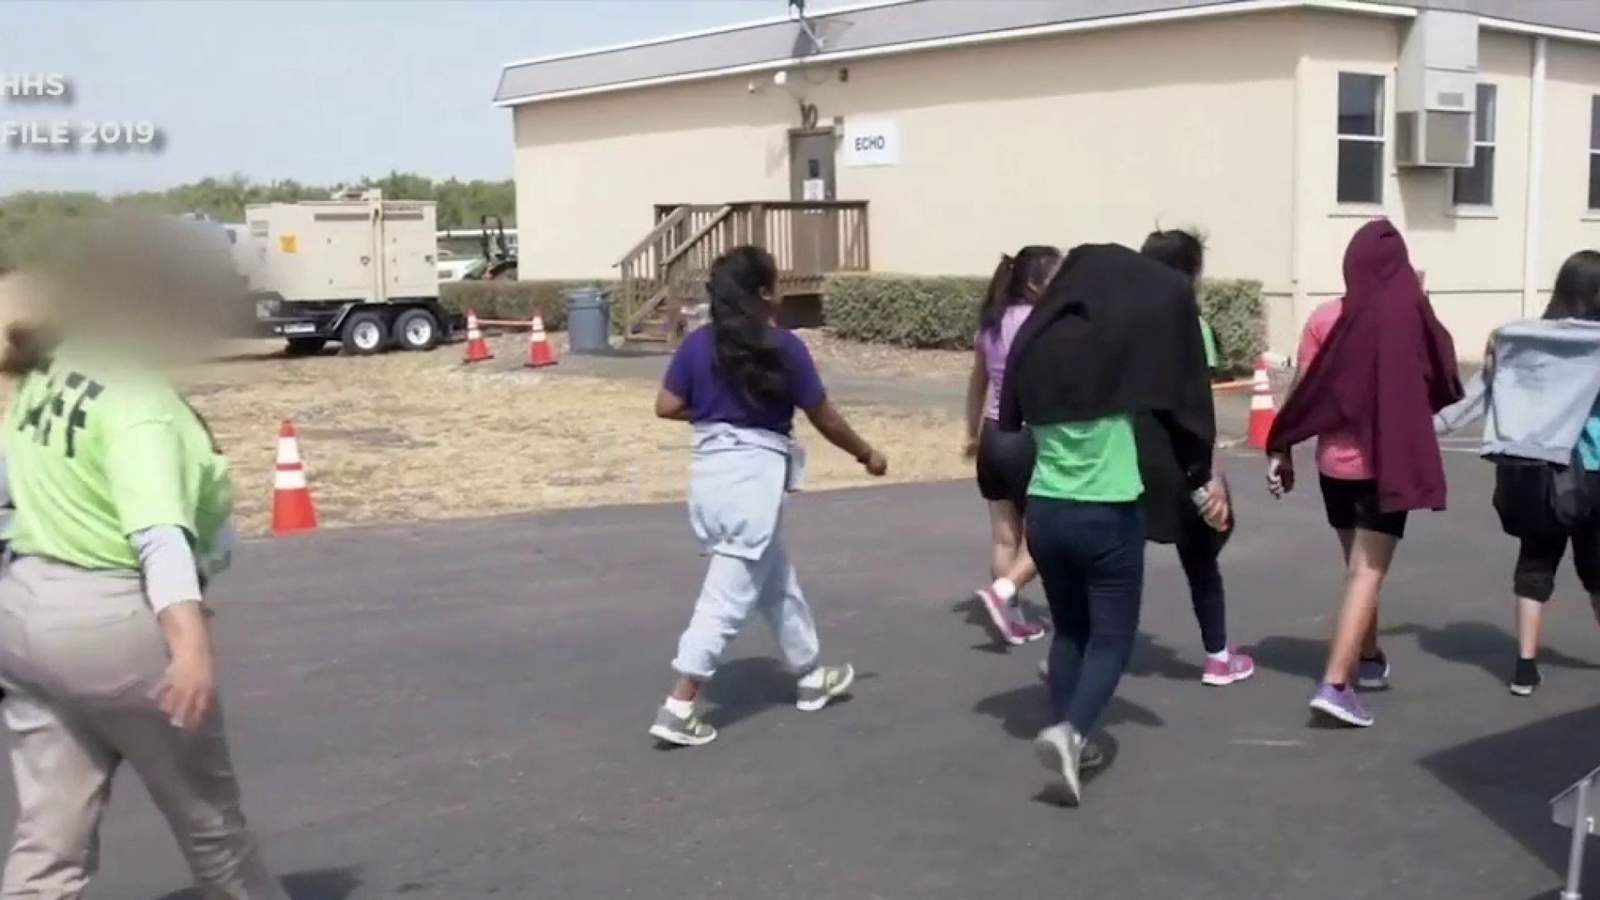 New emergency intake site established for unaccompanied child migrants in Carrizo Springs